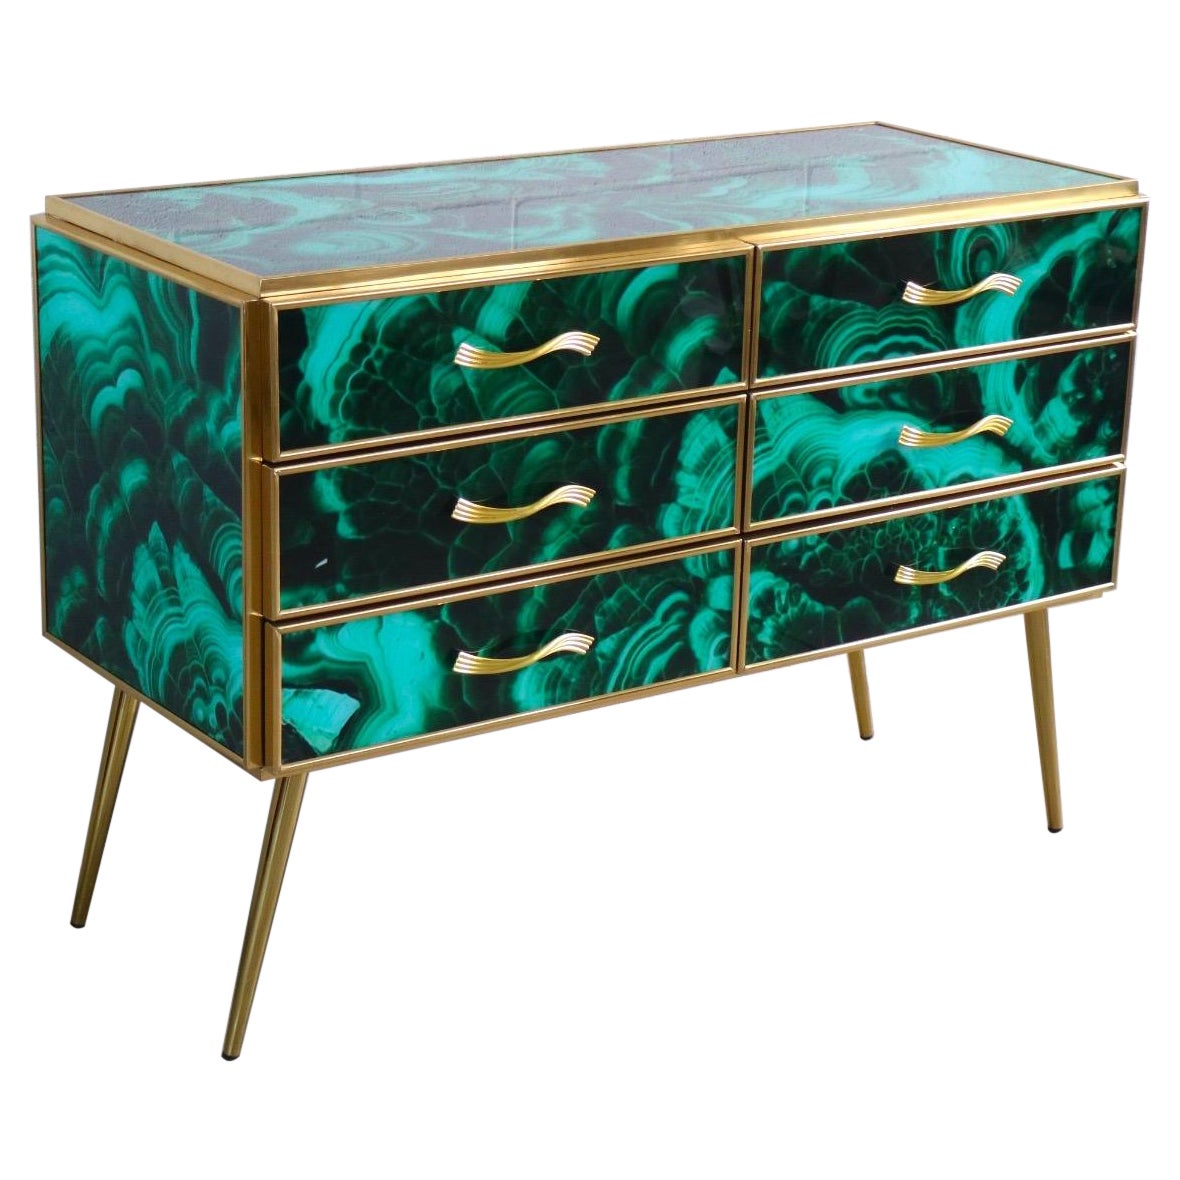 Striking brass frame and hand-cut Malachite imitation Murano glass Commode or chest of drawer, raised on special brass legs. 
Handmade by a master artisan.